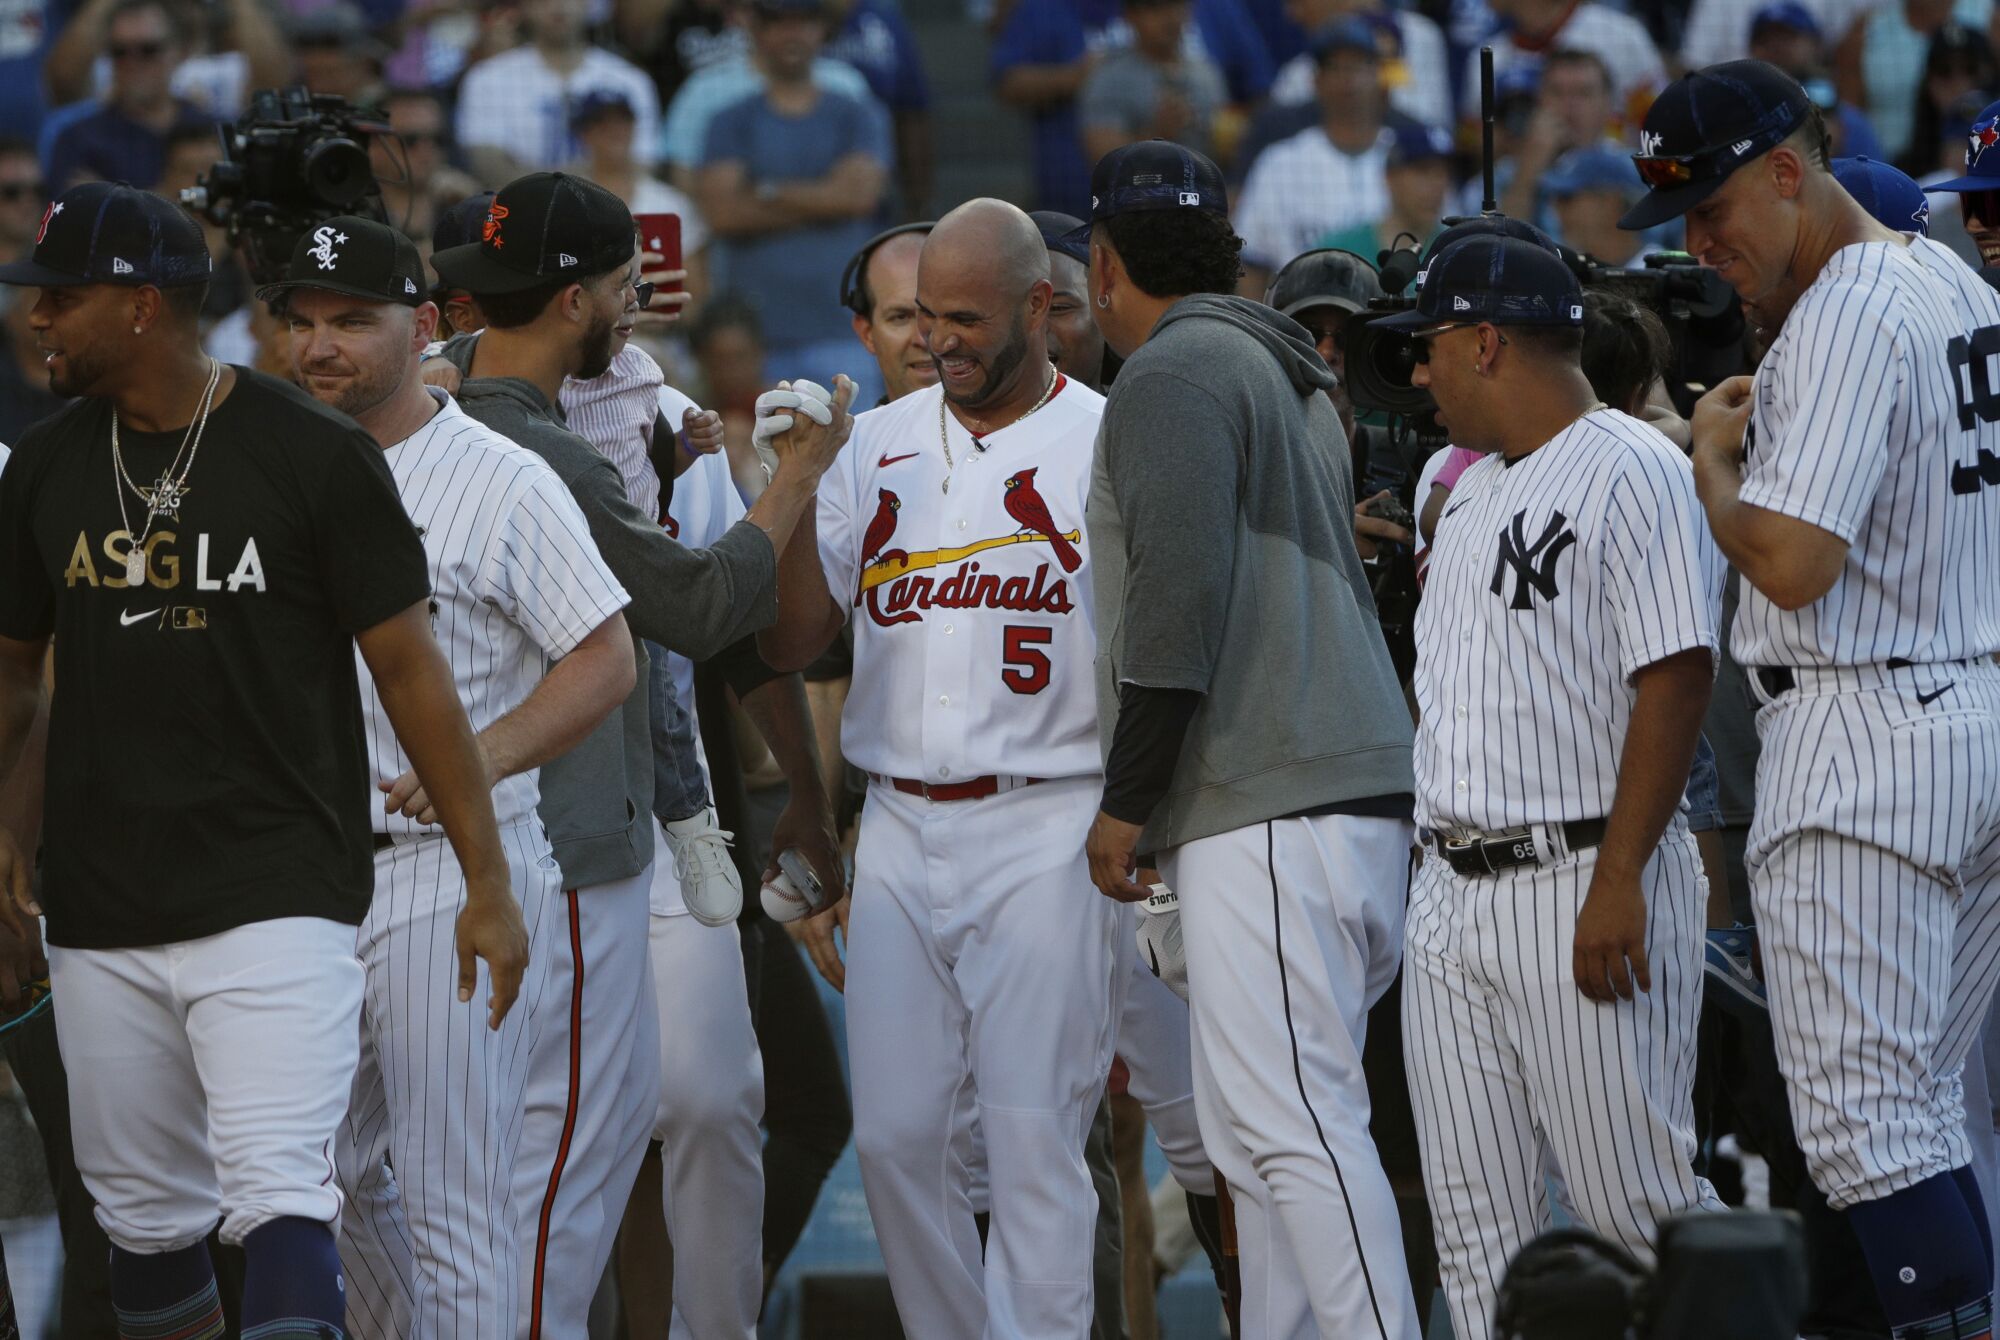 Fellow All-Stars pay tribute to Albert Pujols (5) during the home run derby at Dodger Stadium on July 18, 2022.